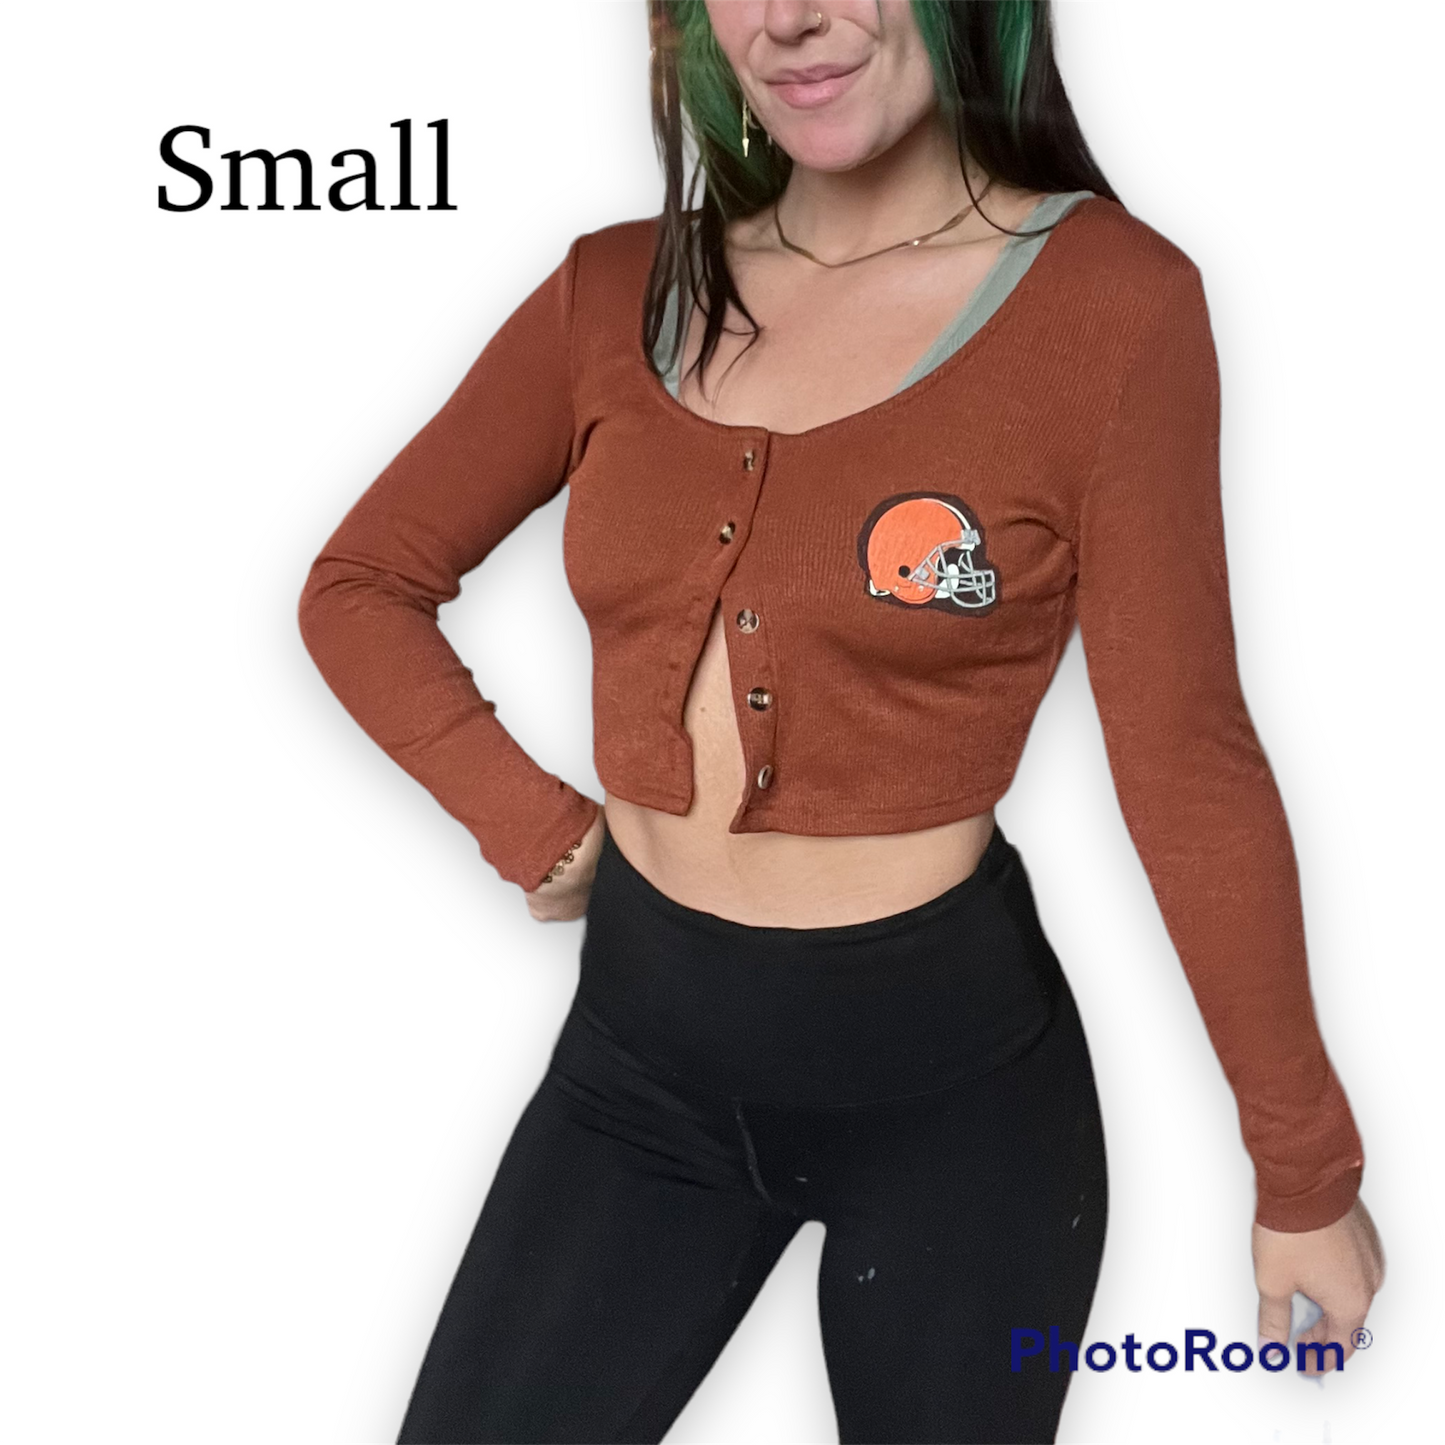 Cleveland Browns sweater